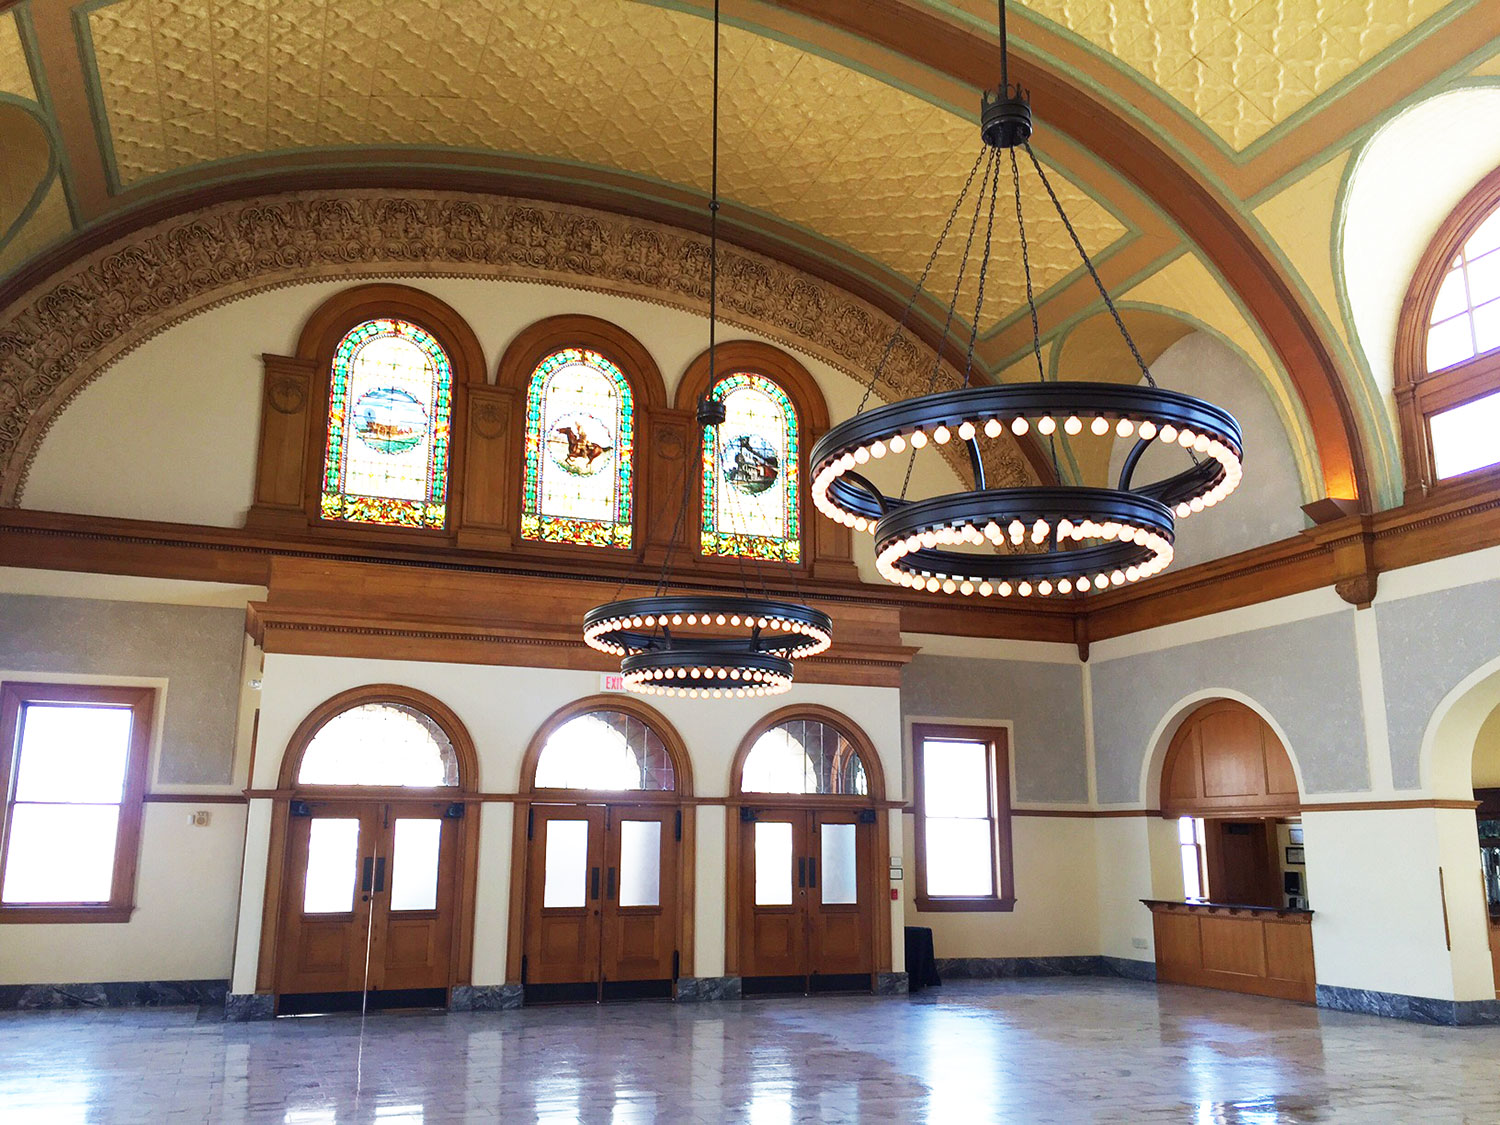 Fort worth wedding venue Ashton Depot grand ballroom and stained glass windows